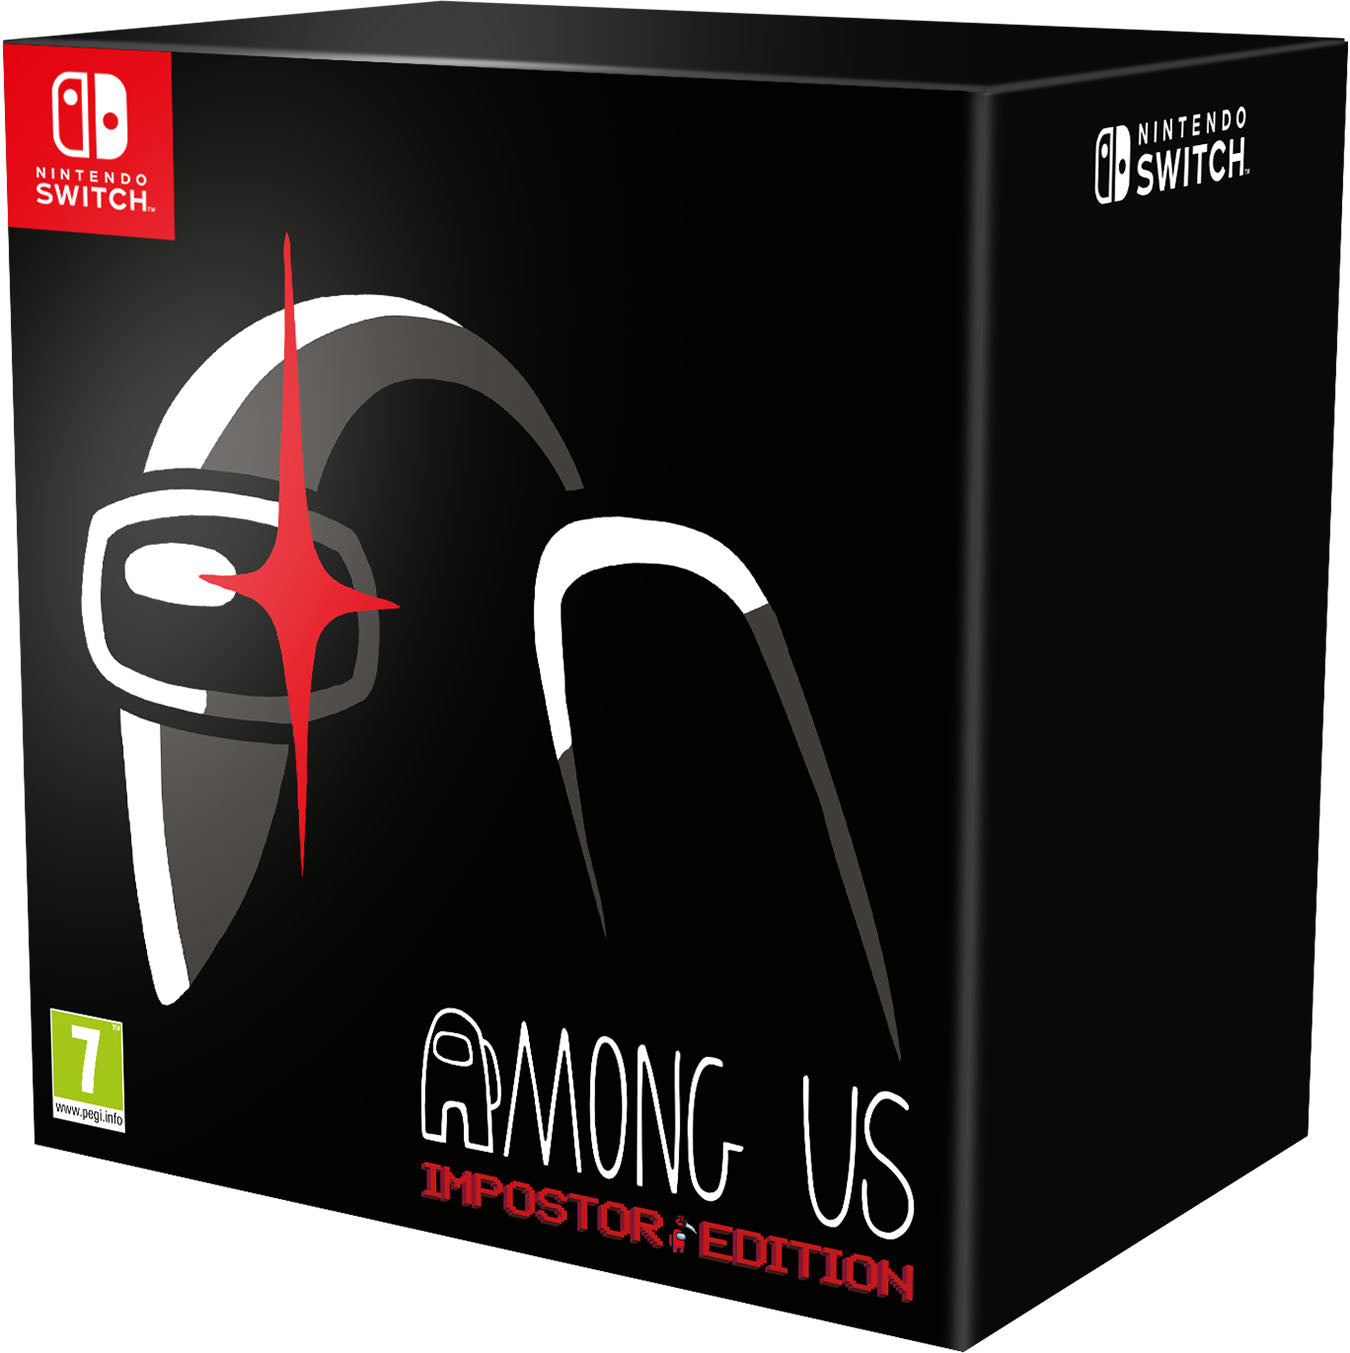 Buy Online Latest Premium Quality Among Us Imposter Edition Nintendo Switch - Buy Tech Today